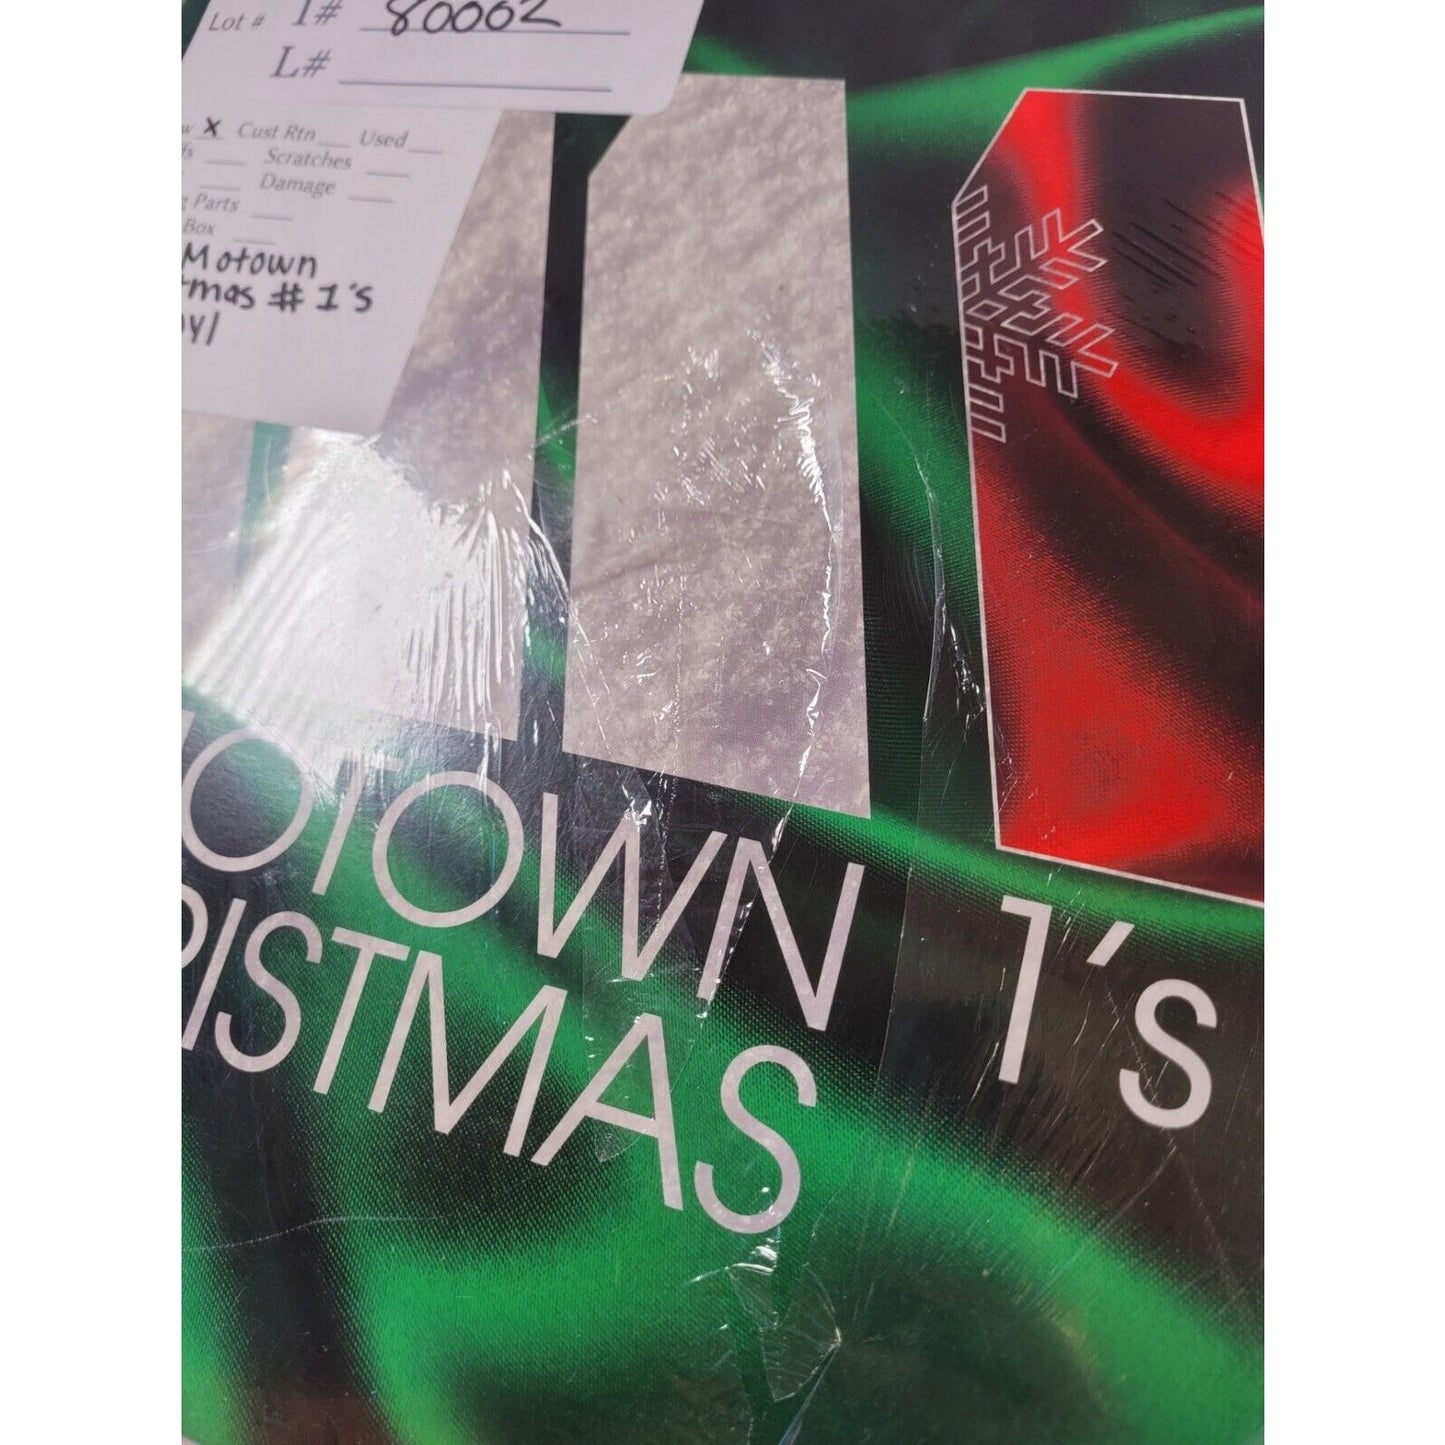 Motown Christmas #1's Exclusive Limited Edition 2x Vinyls, Outer Plastic Torn